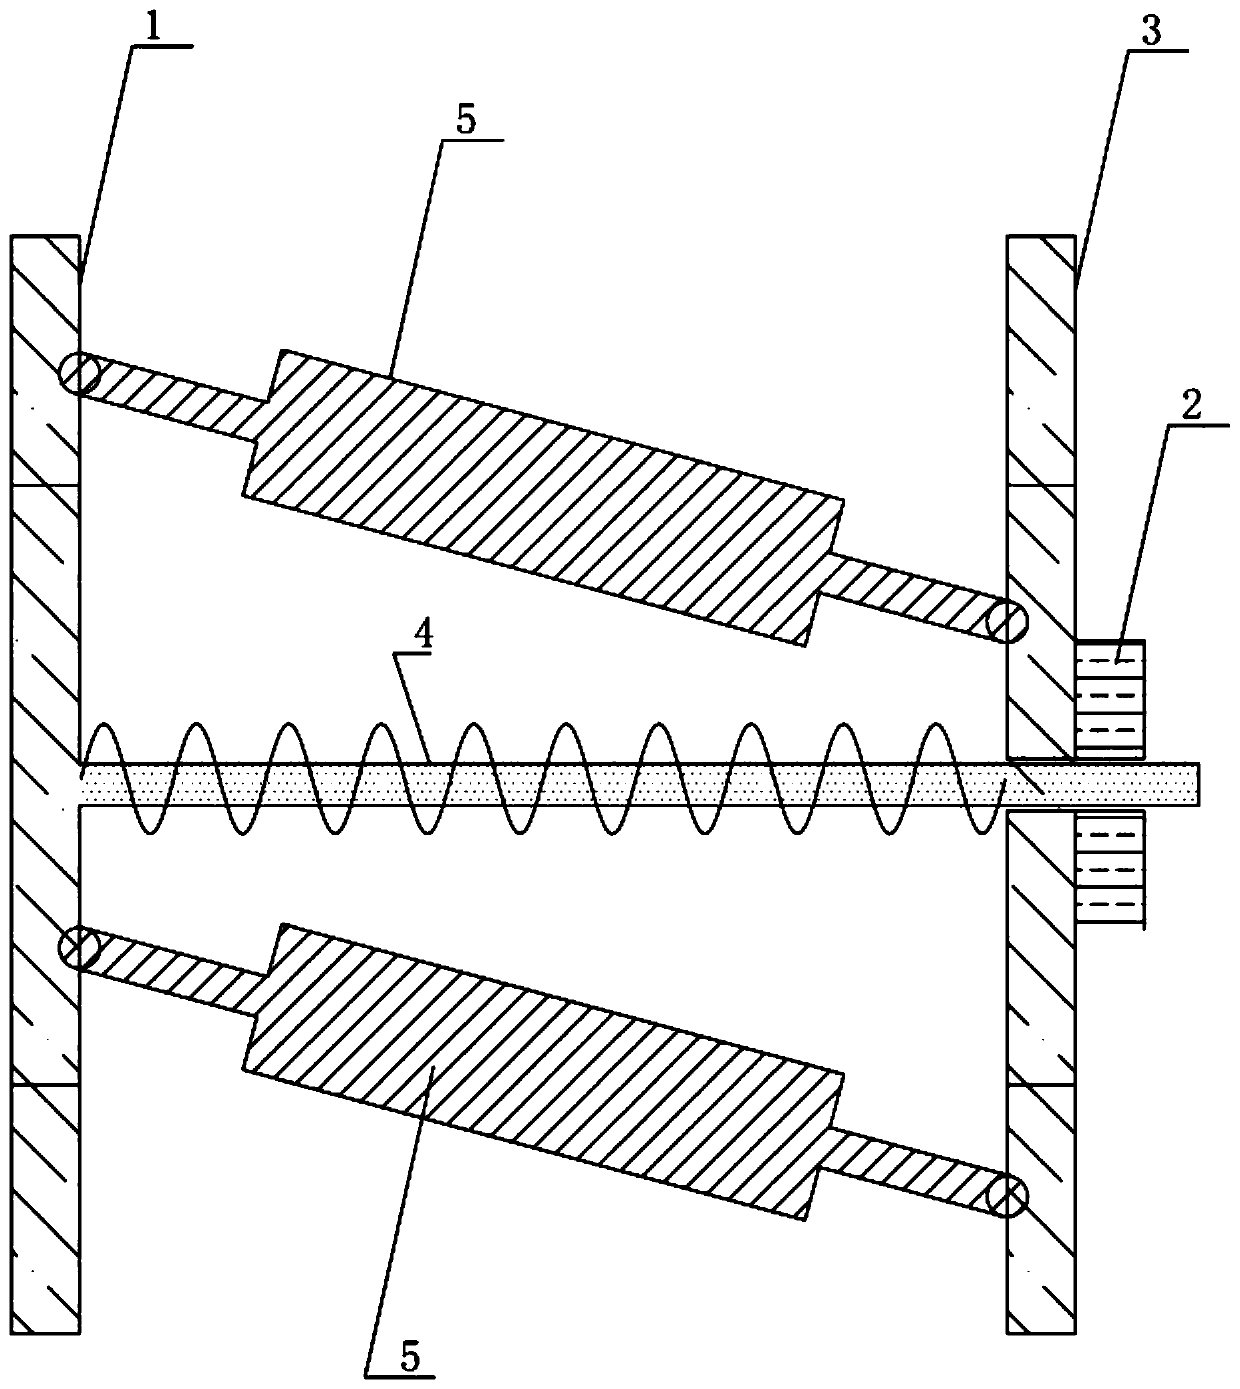 Device for passively slowing relative rotation of ultra-large floating body